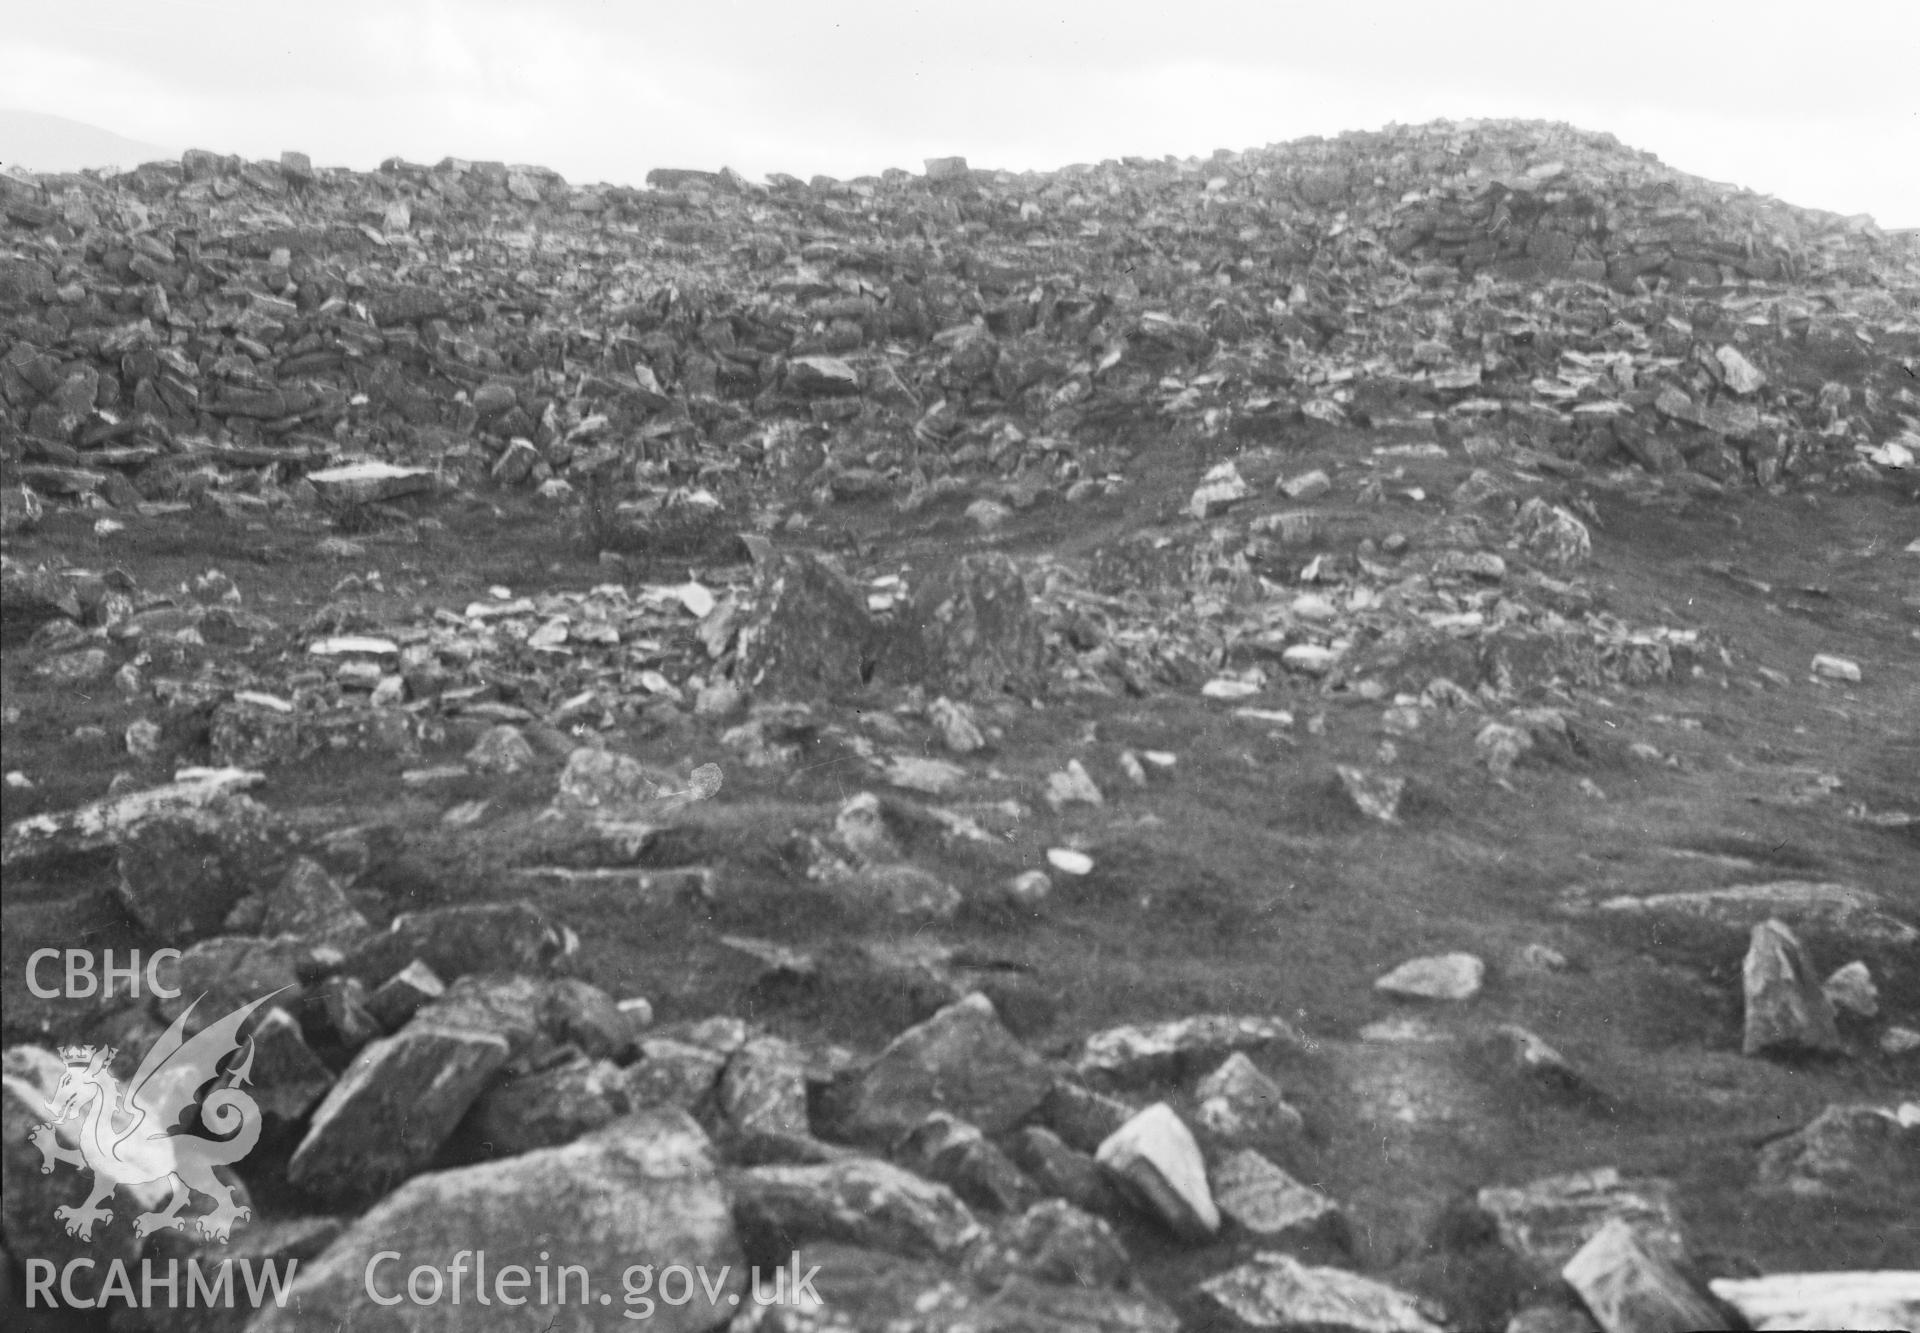 Digital copy of a nitrate negative showing Castell Caer Leion.